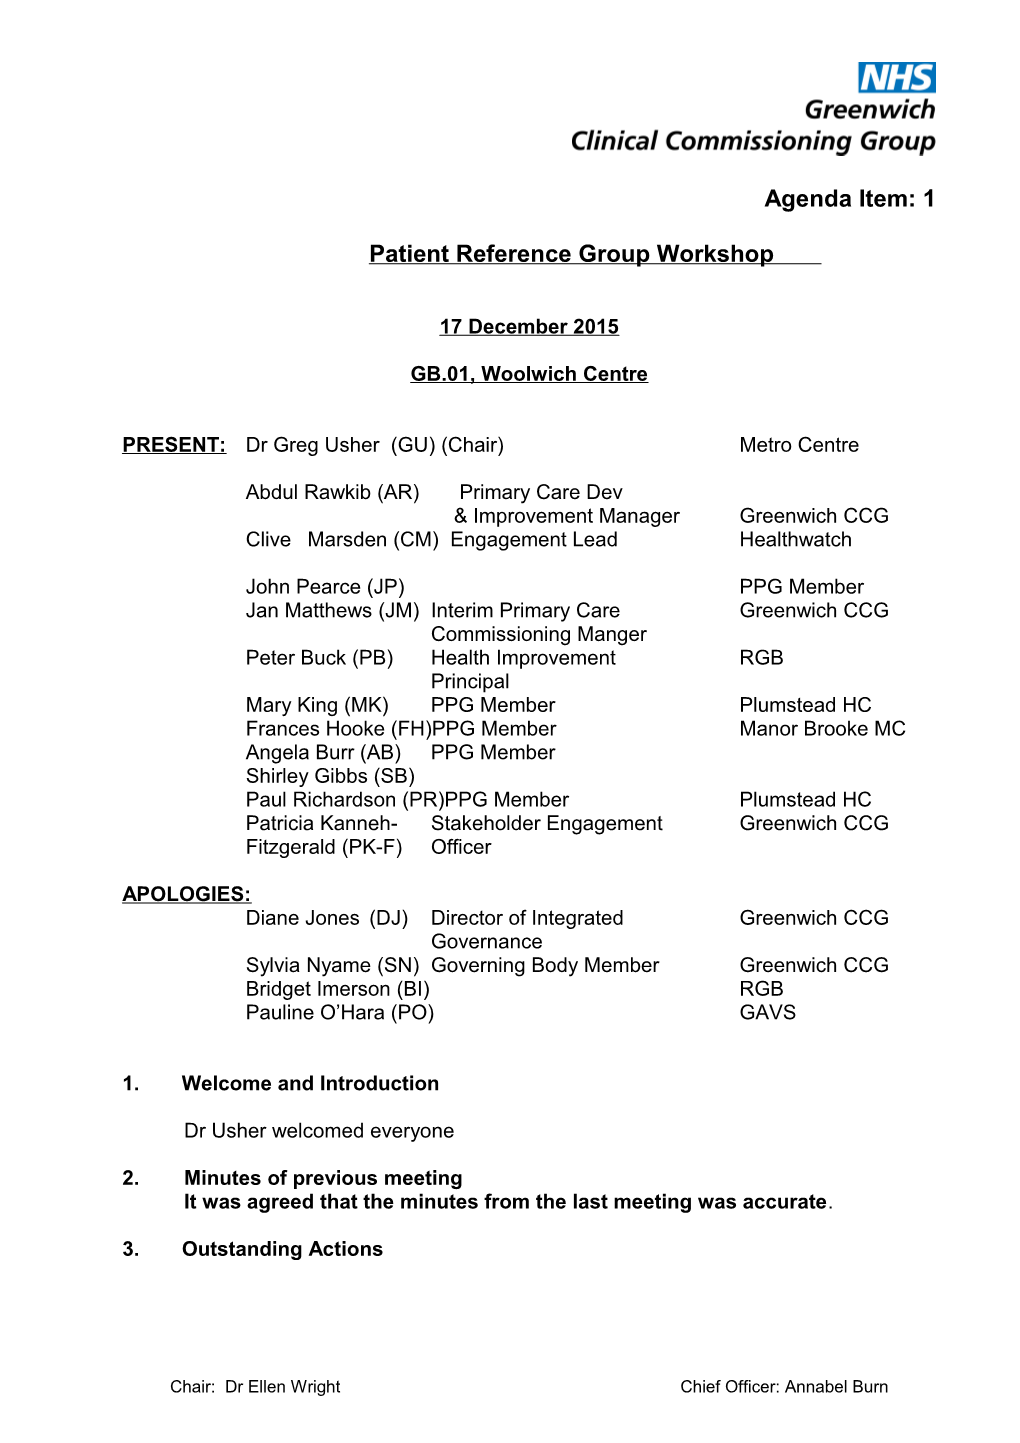 Patient Reference Group Workshop